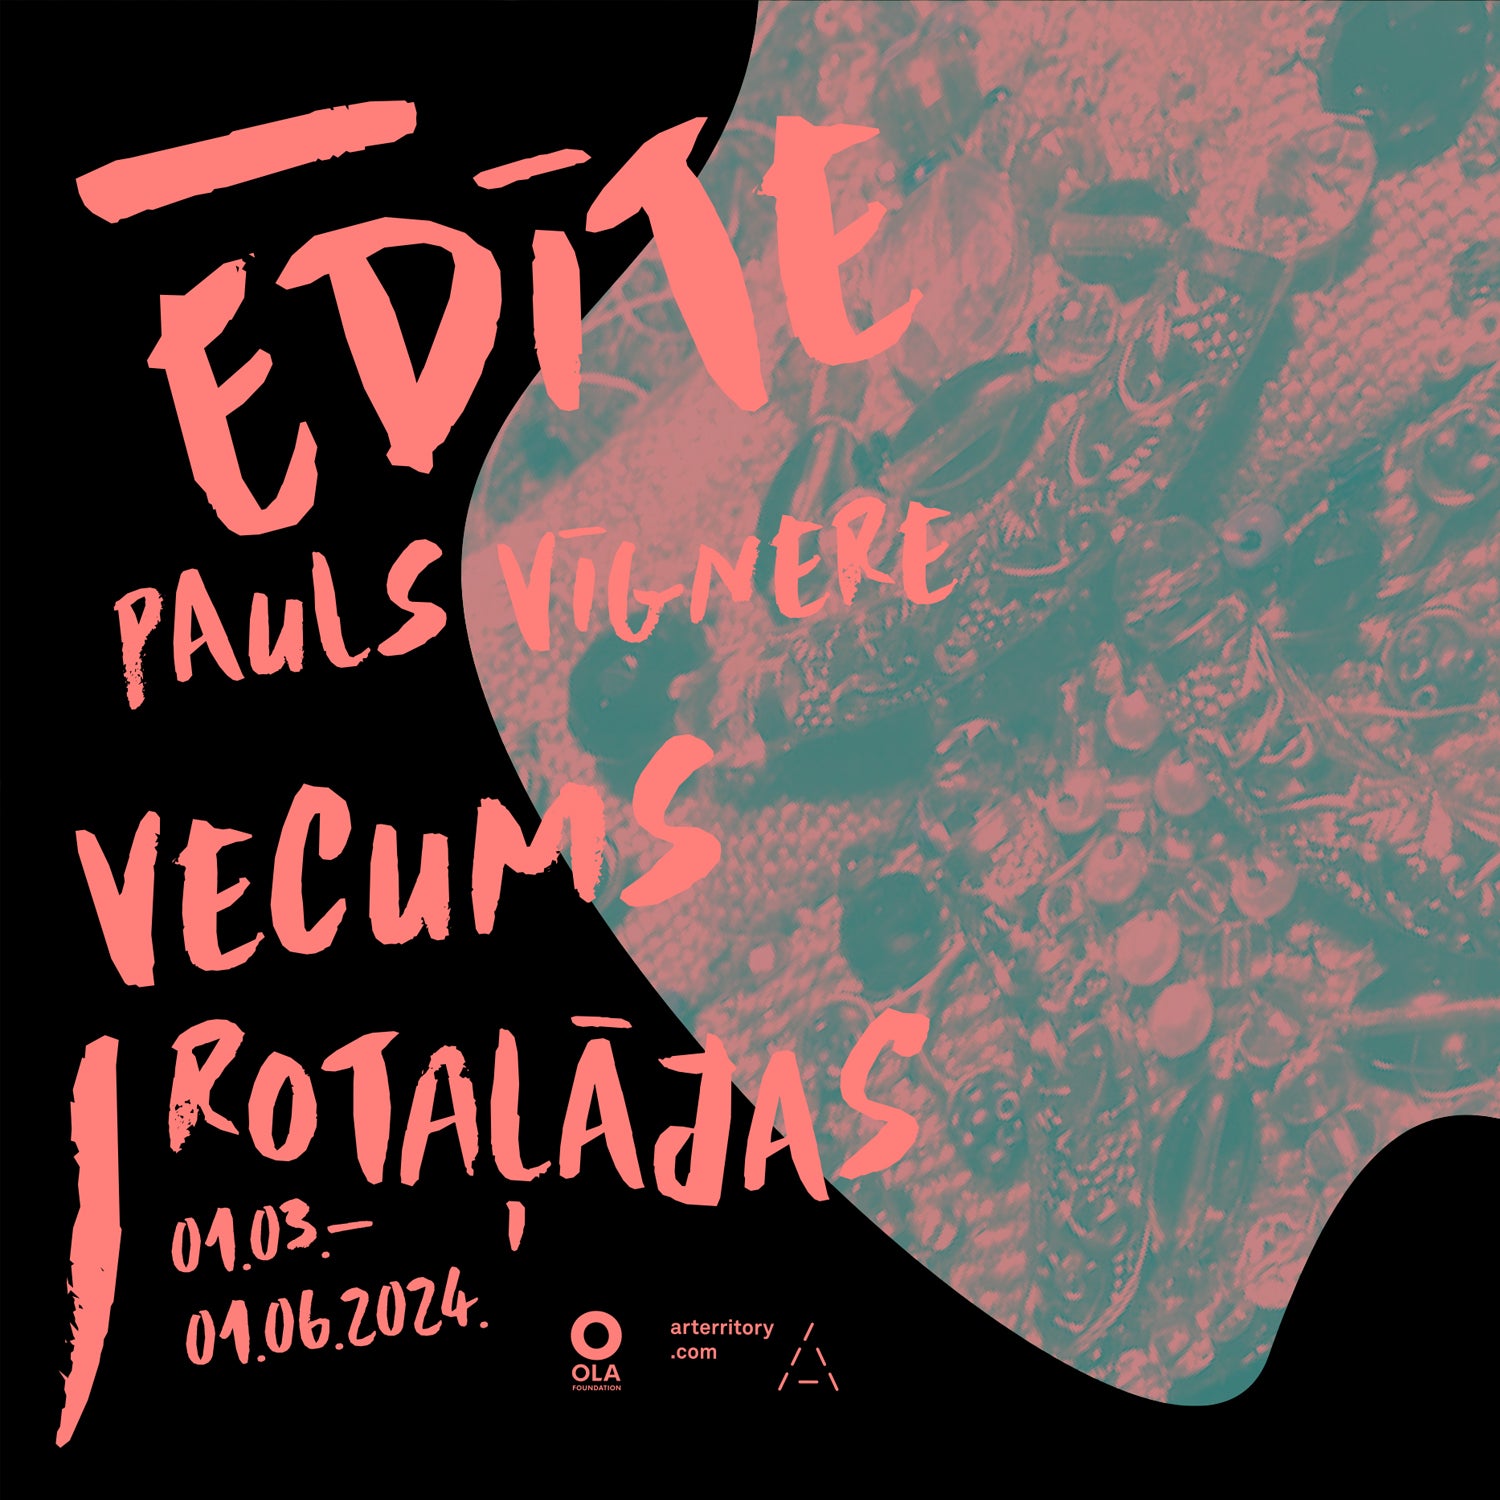 Exhibition by textile artist Edīte Pauls-Vīgnere at the Ola Foundation from March 1 — Arterritory